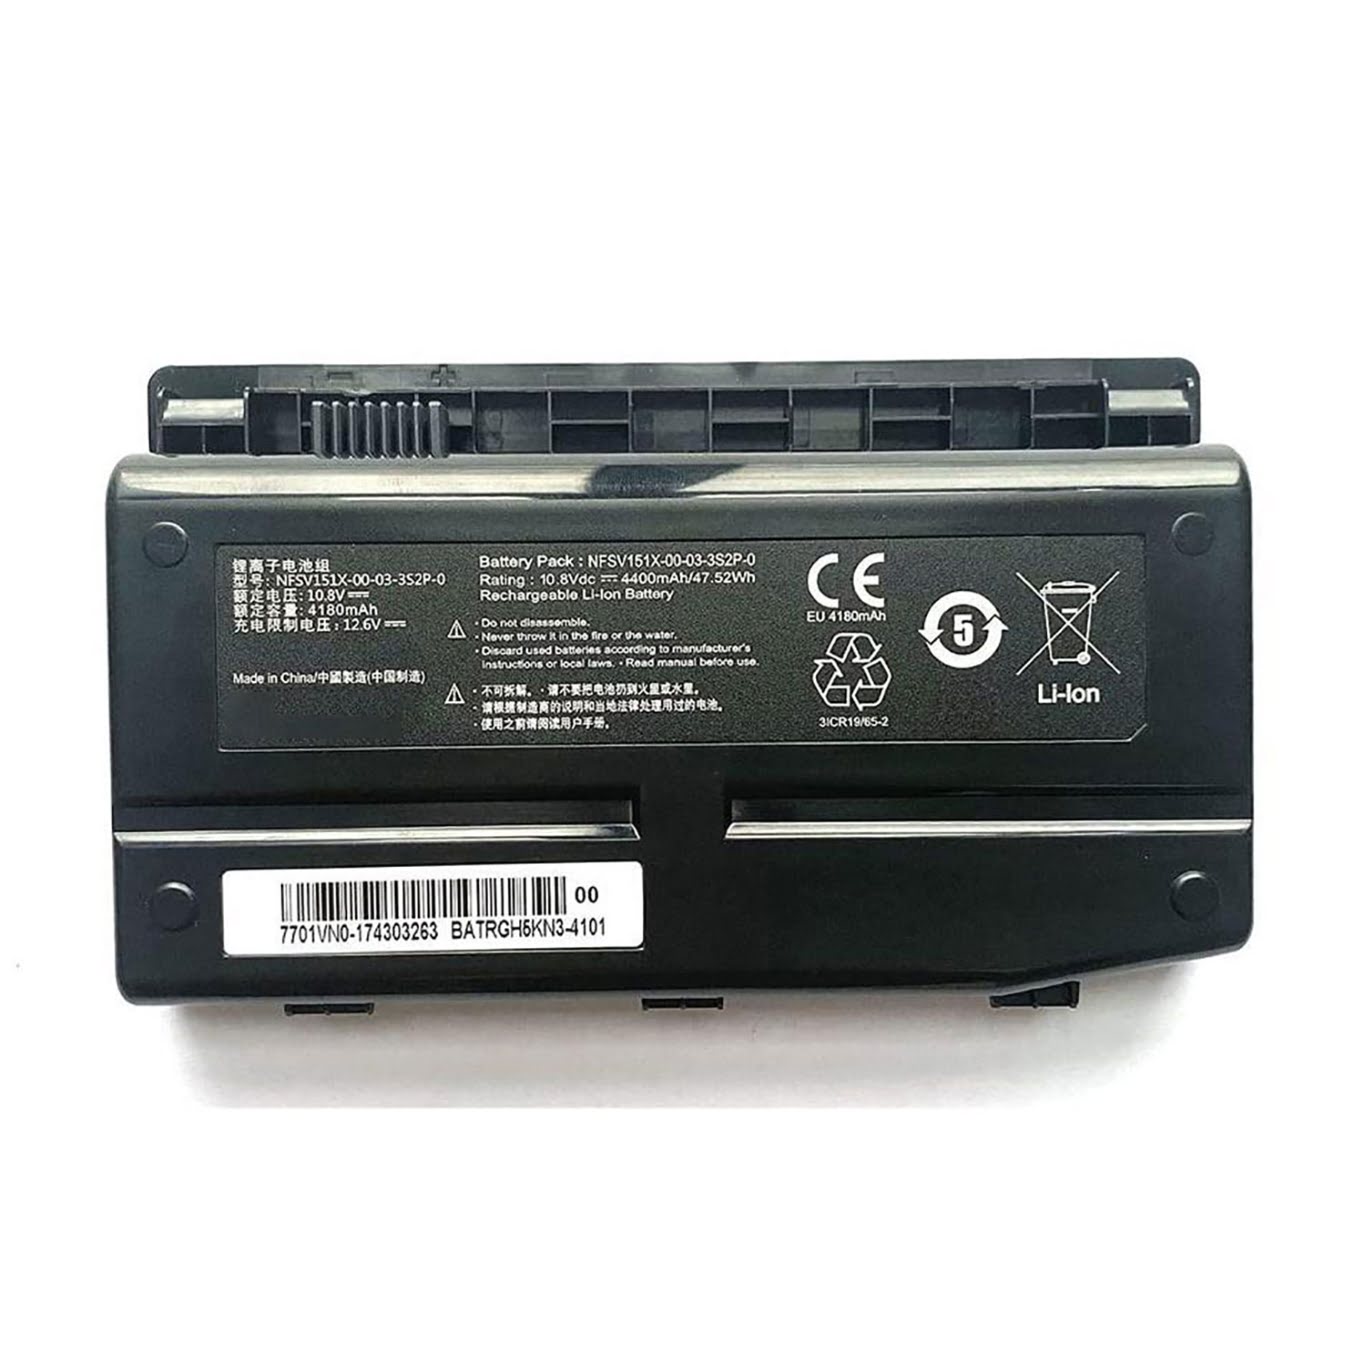 GE5SN-03-12-3S2P-0, NF5V151X-00-03-3S2P-0 replacement Laptop Battery for Machenike F1, F117, 10.8V, 4400mah / 47.52wh